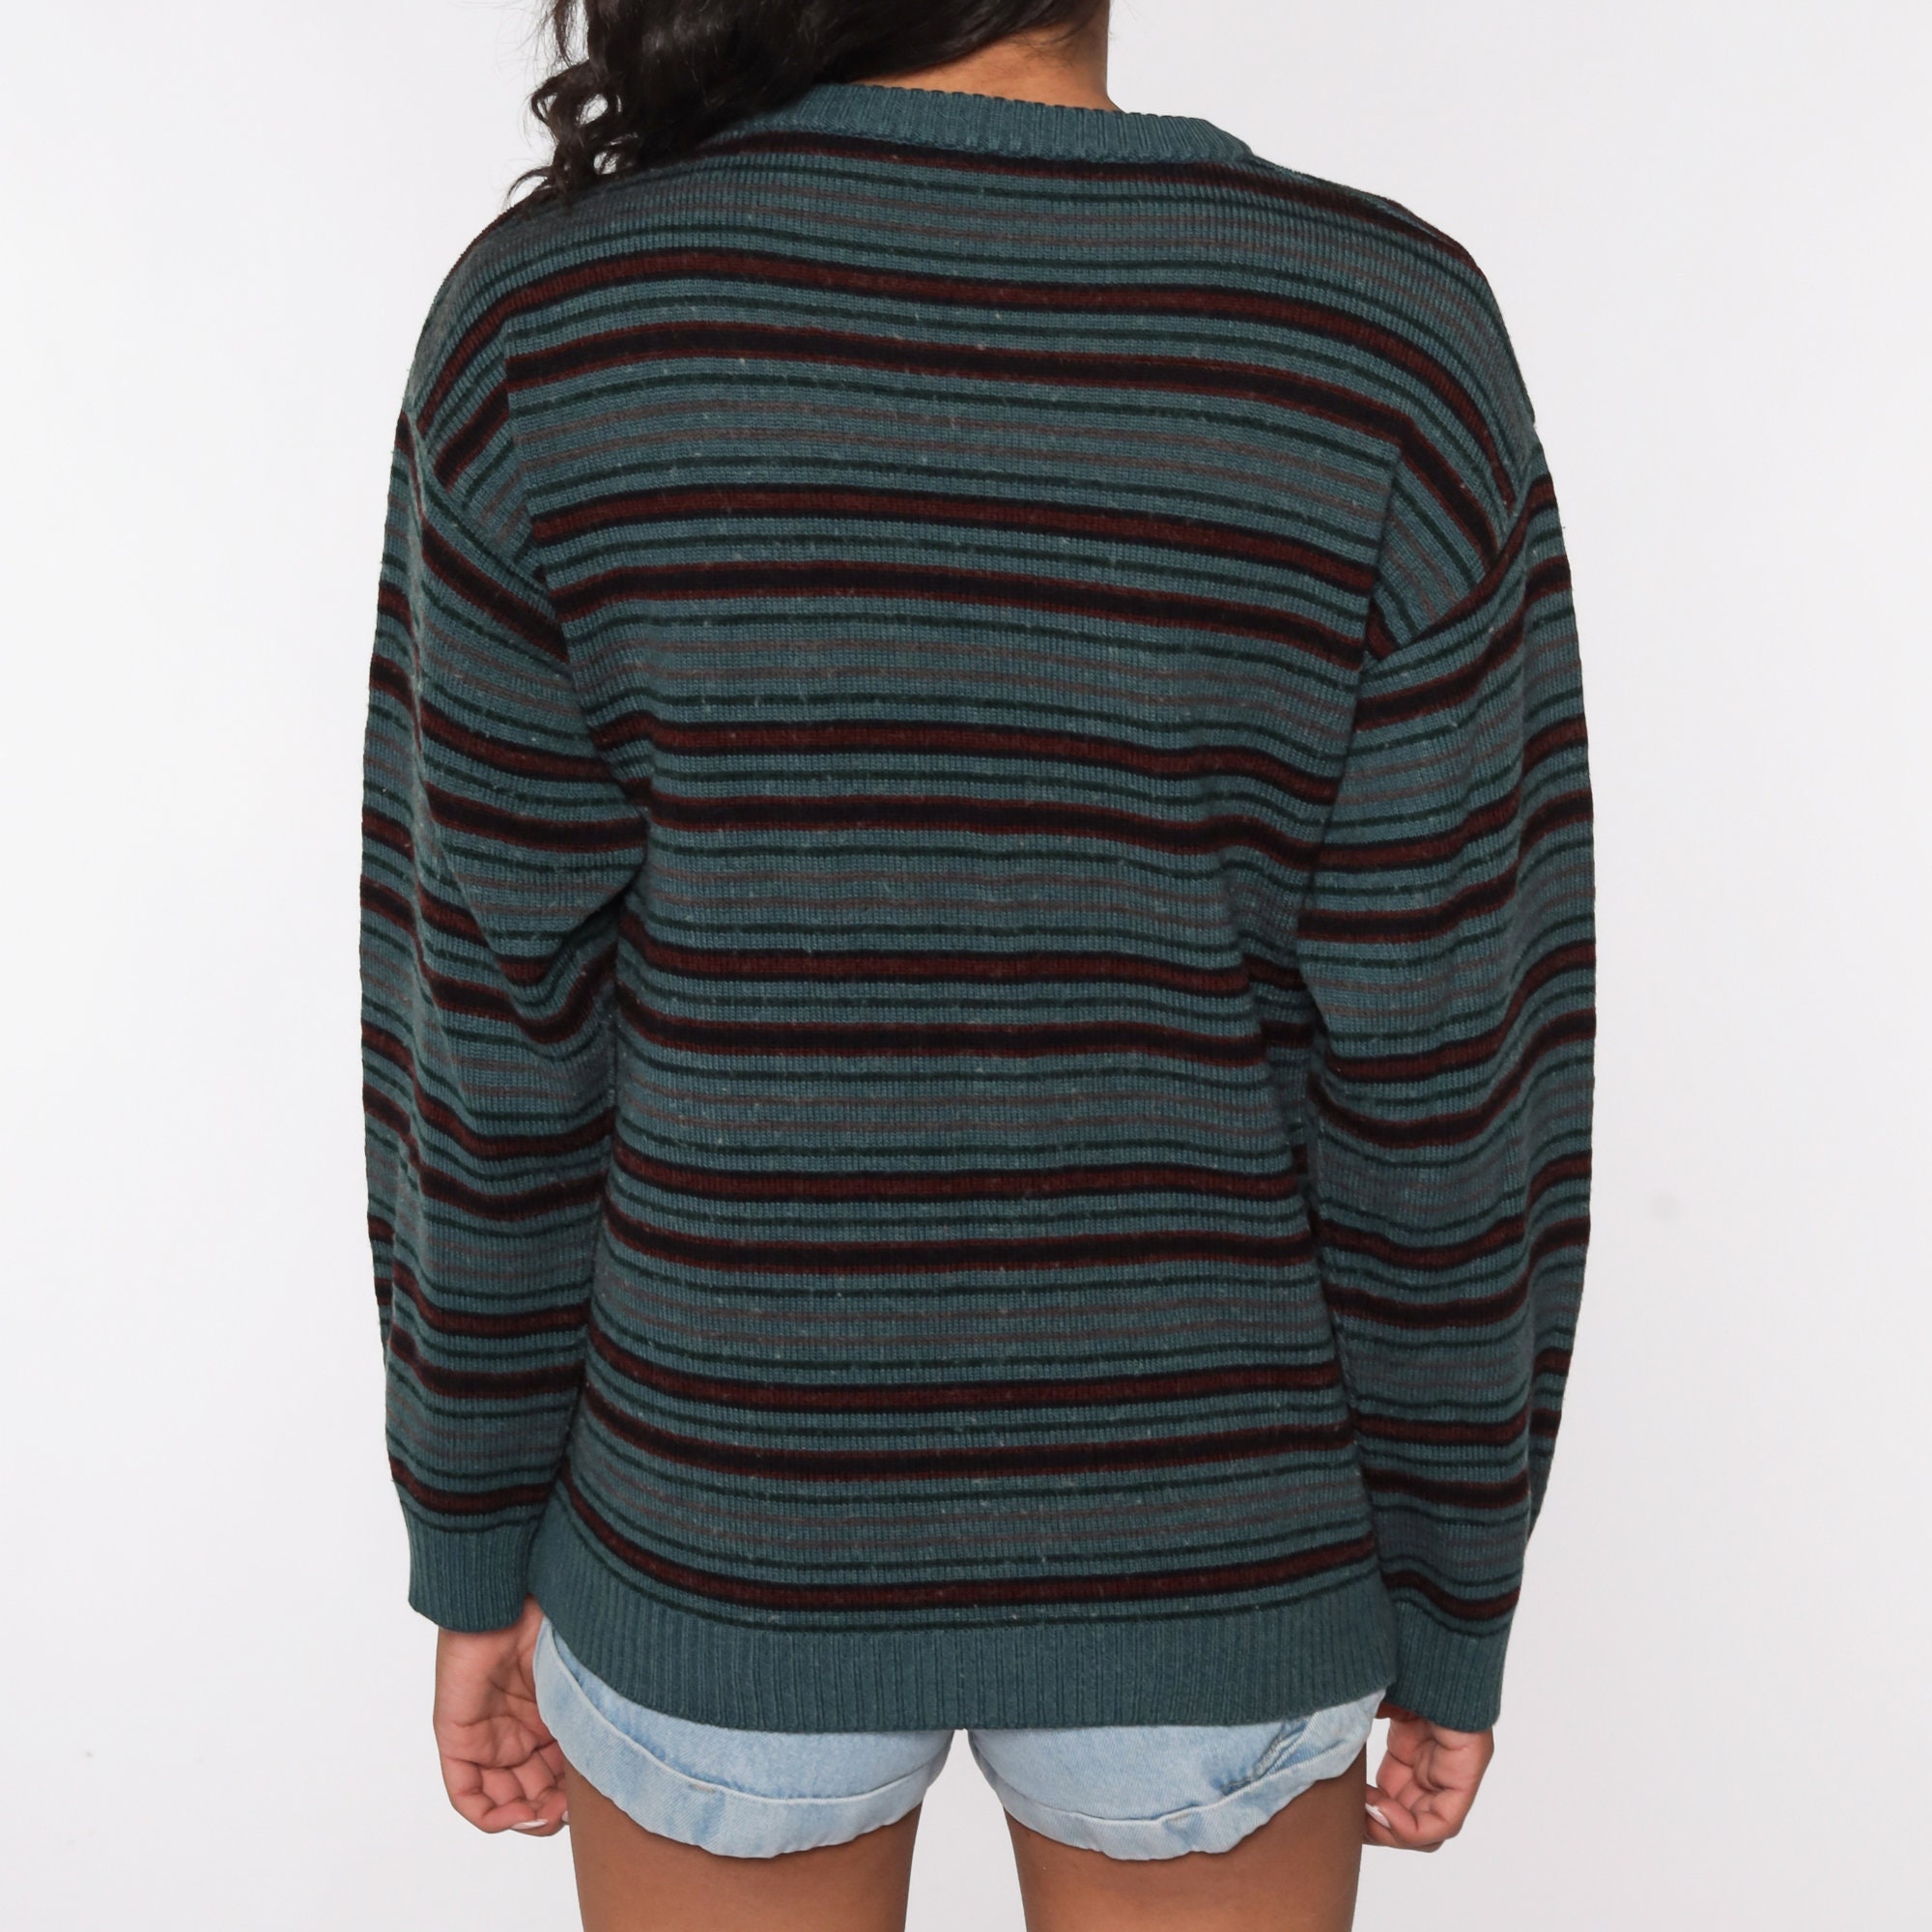 Grey-Blue Striped Sweater Knit Sweater 80s Pullover Grey Sweater ...